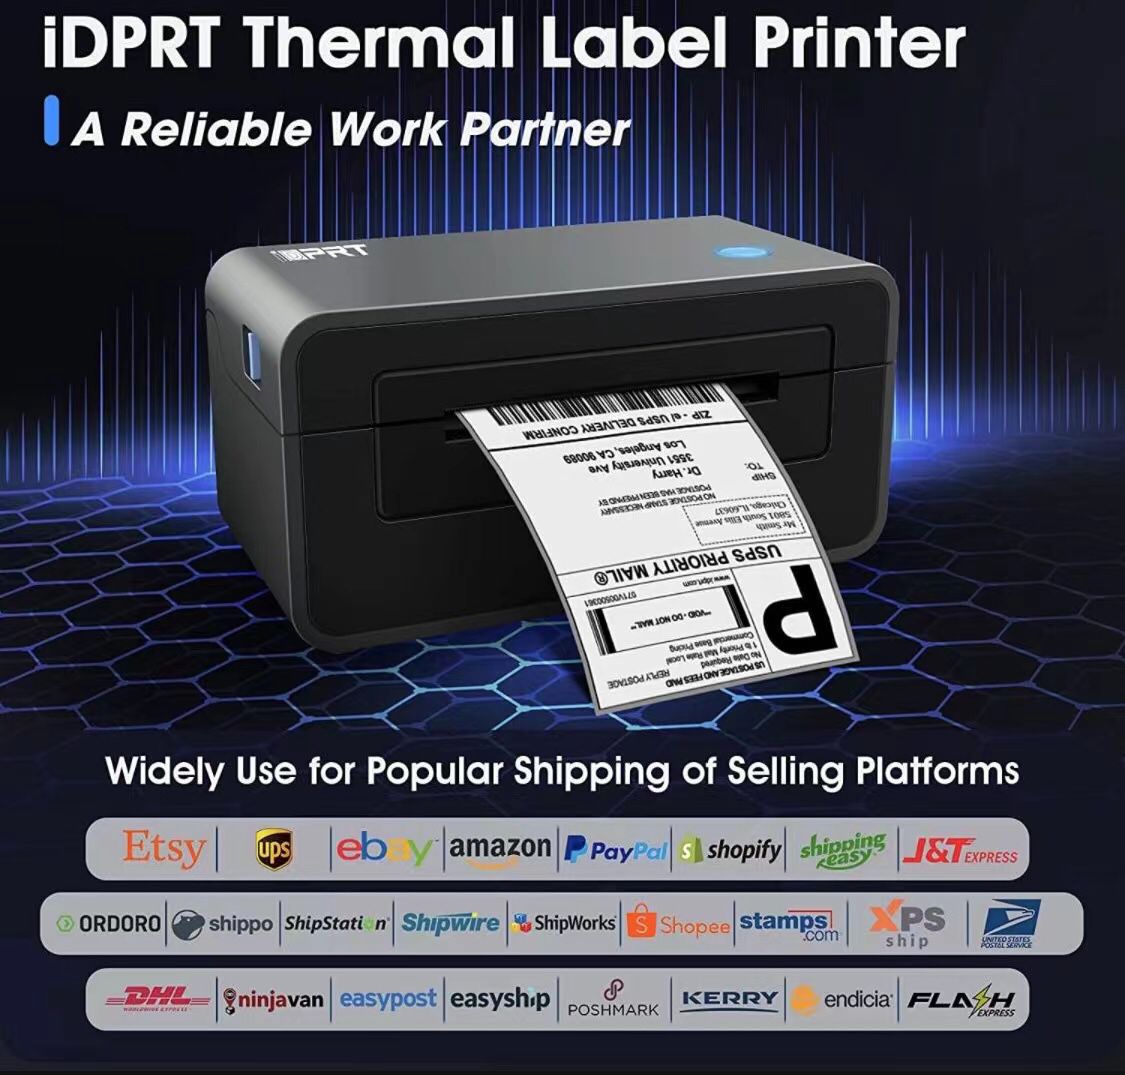 iDPRT Thermal Label Printer - SP410 Thermal Shipping Label Printer, 4x6 Label Printer, Commercial Direct Thermal Label Maker, Compatible with Shopify,